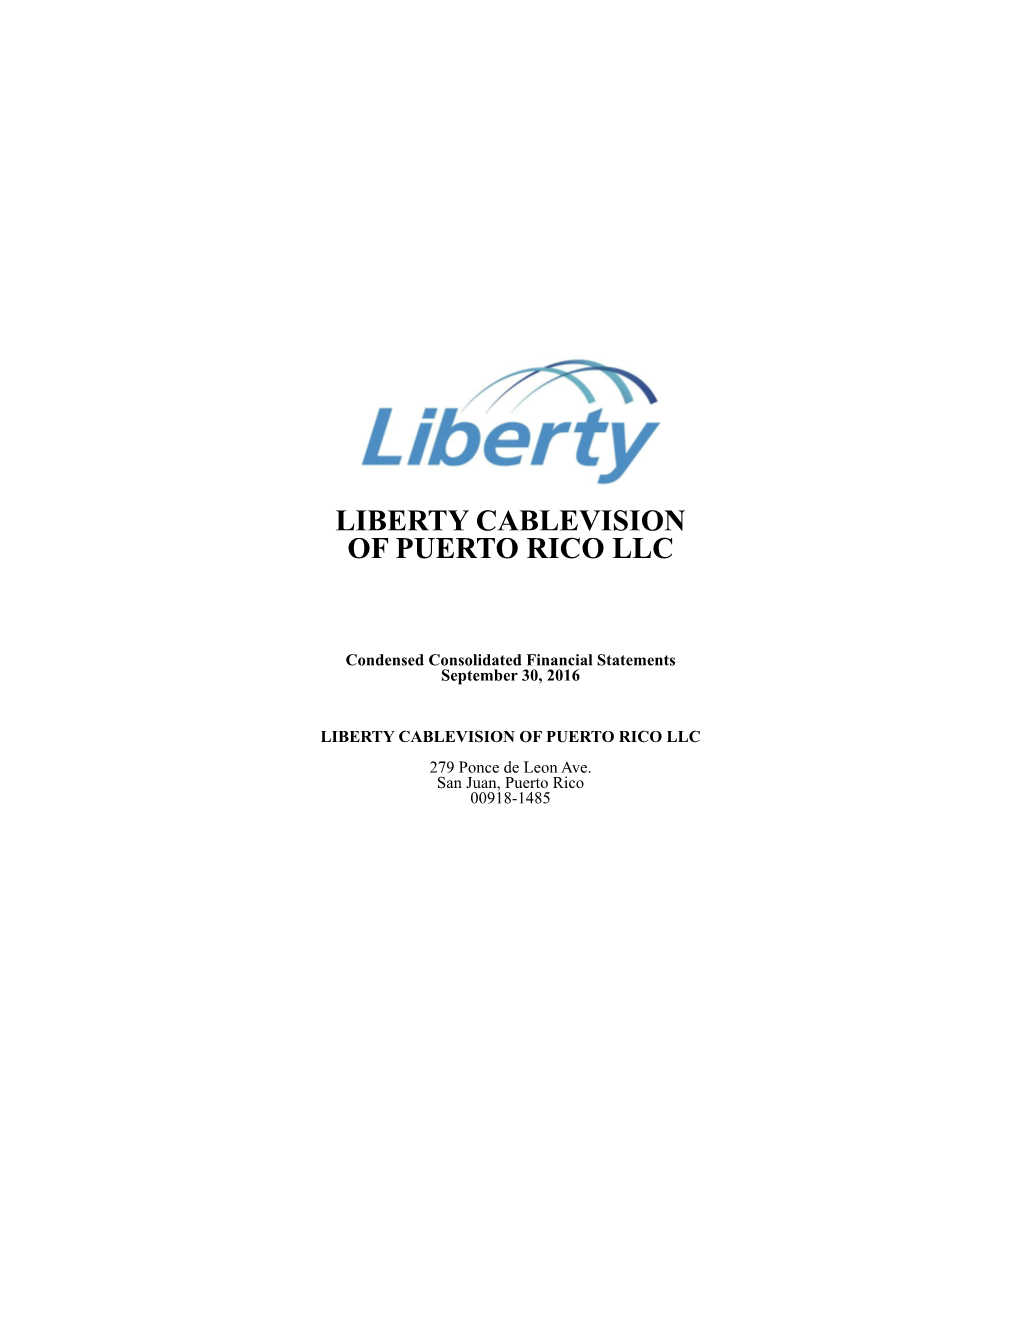 Liberty Cablevision of Puerto Rico Llc